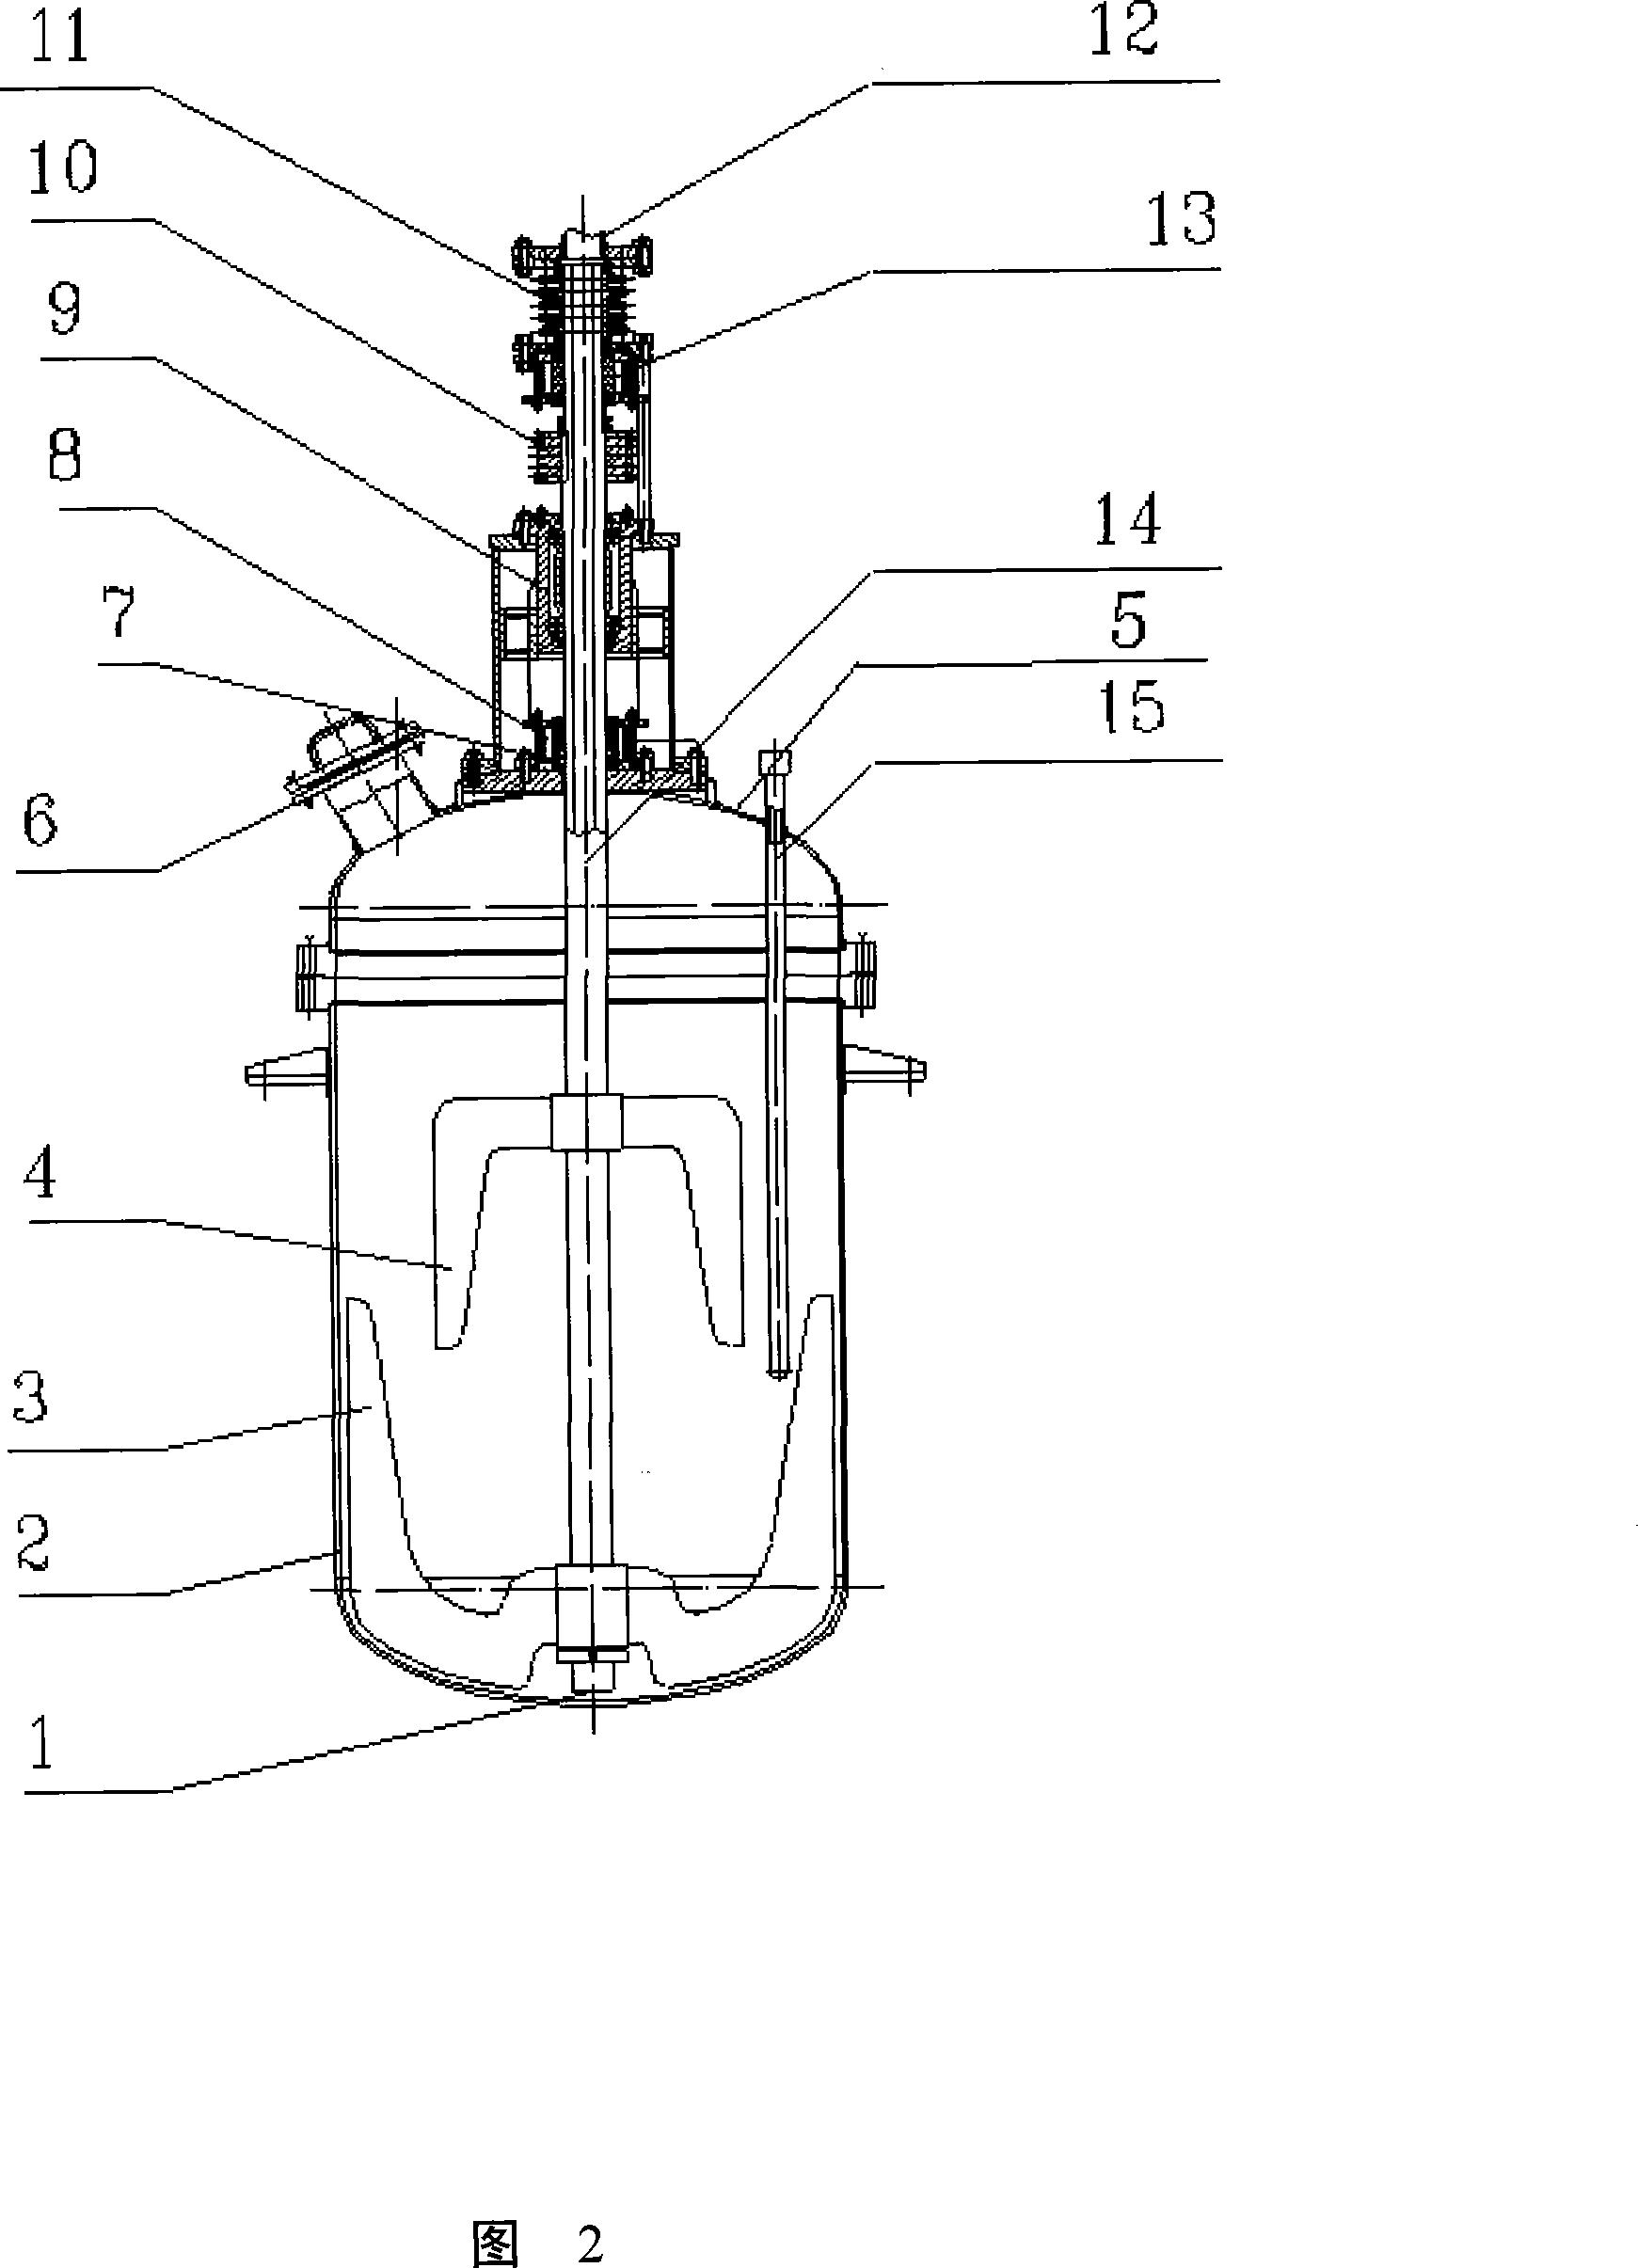 Reaction device for interesterification and polycondensation reaction